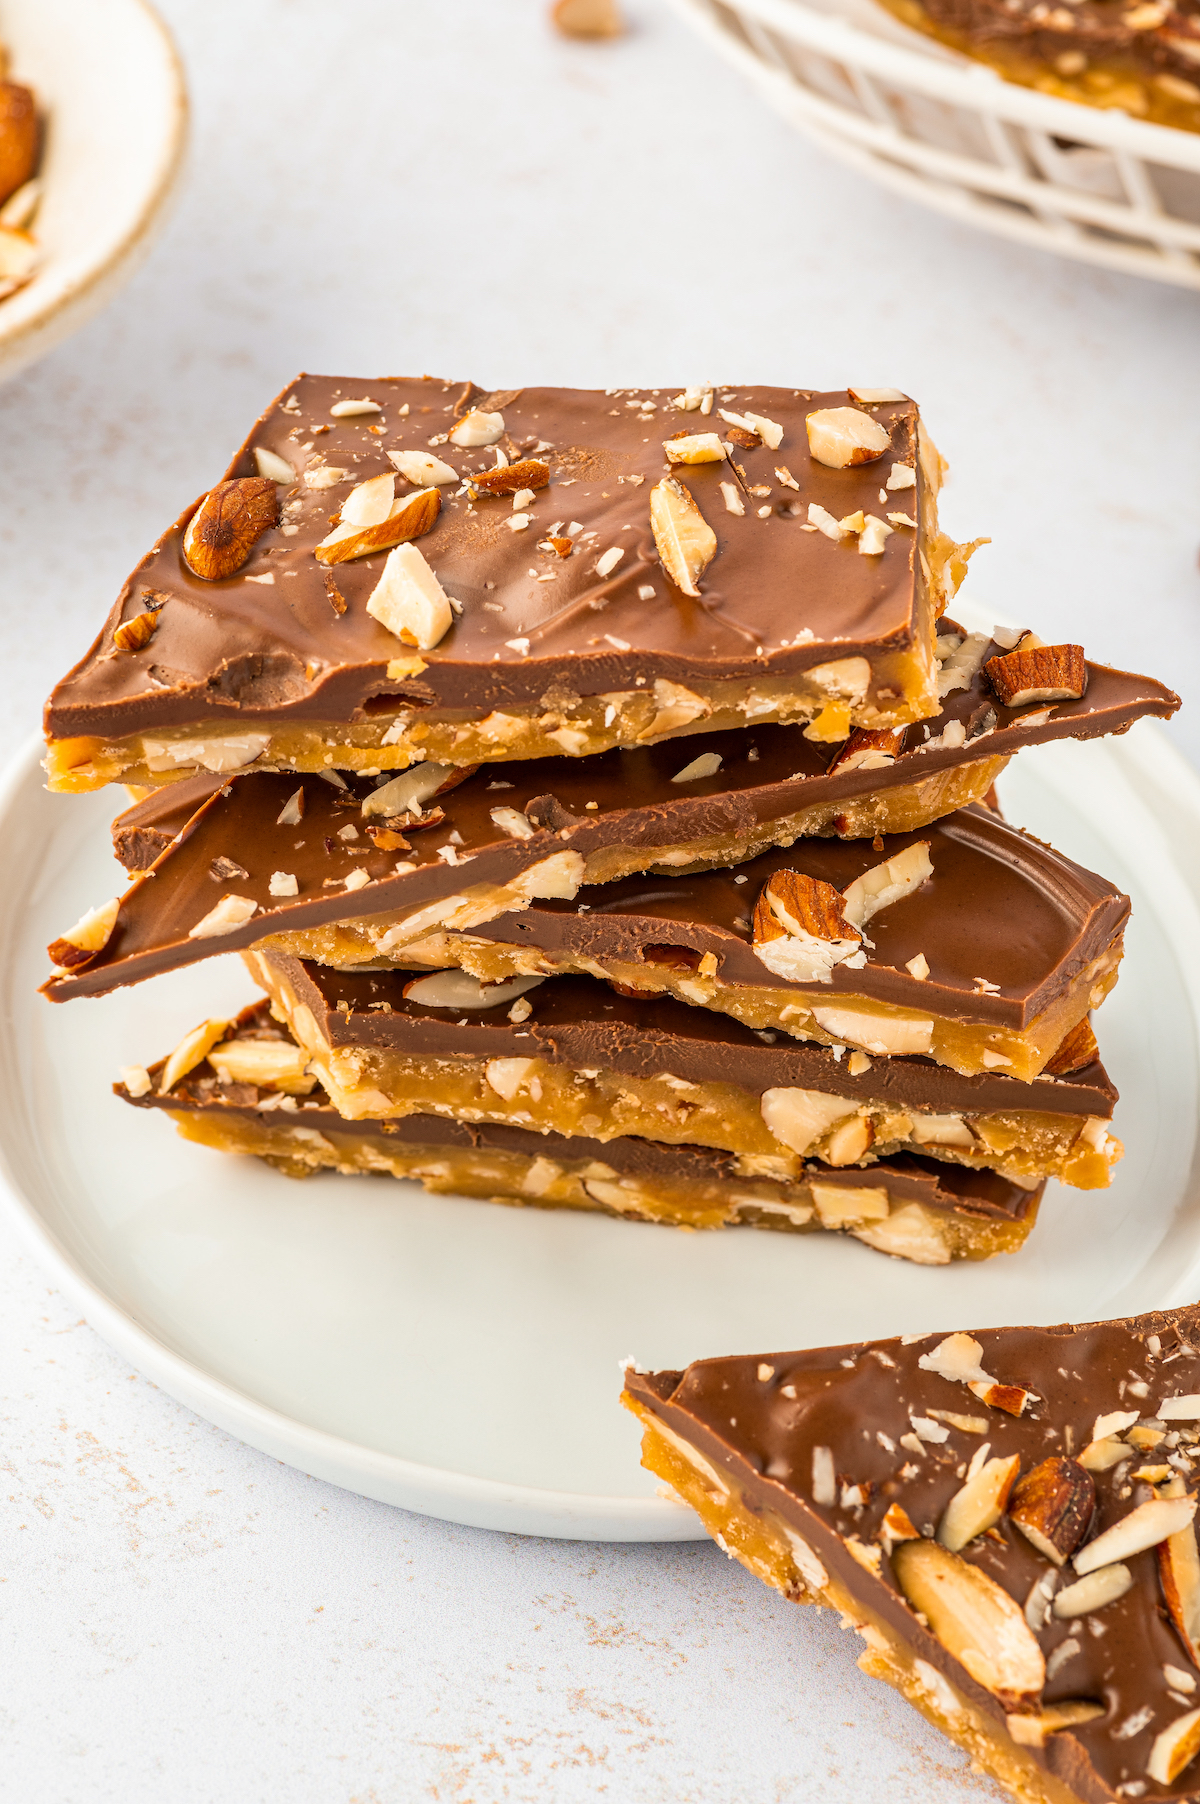 Pieces of chocolate almond toffee candy stacked on top of each other.